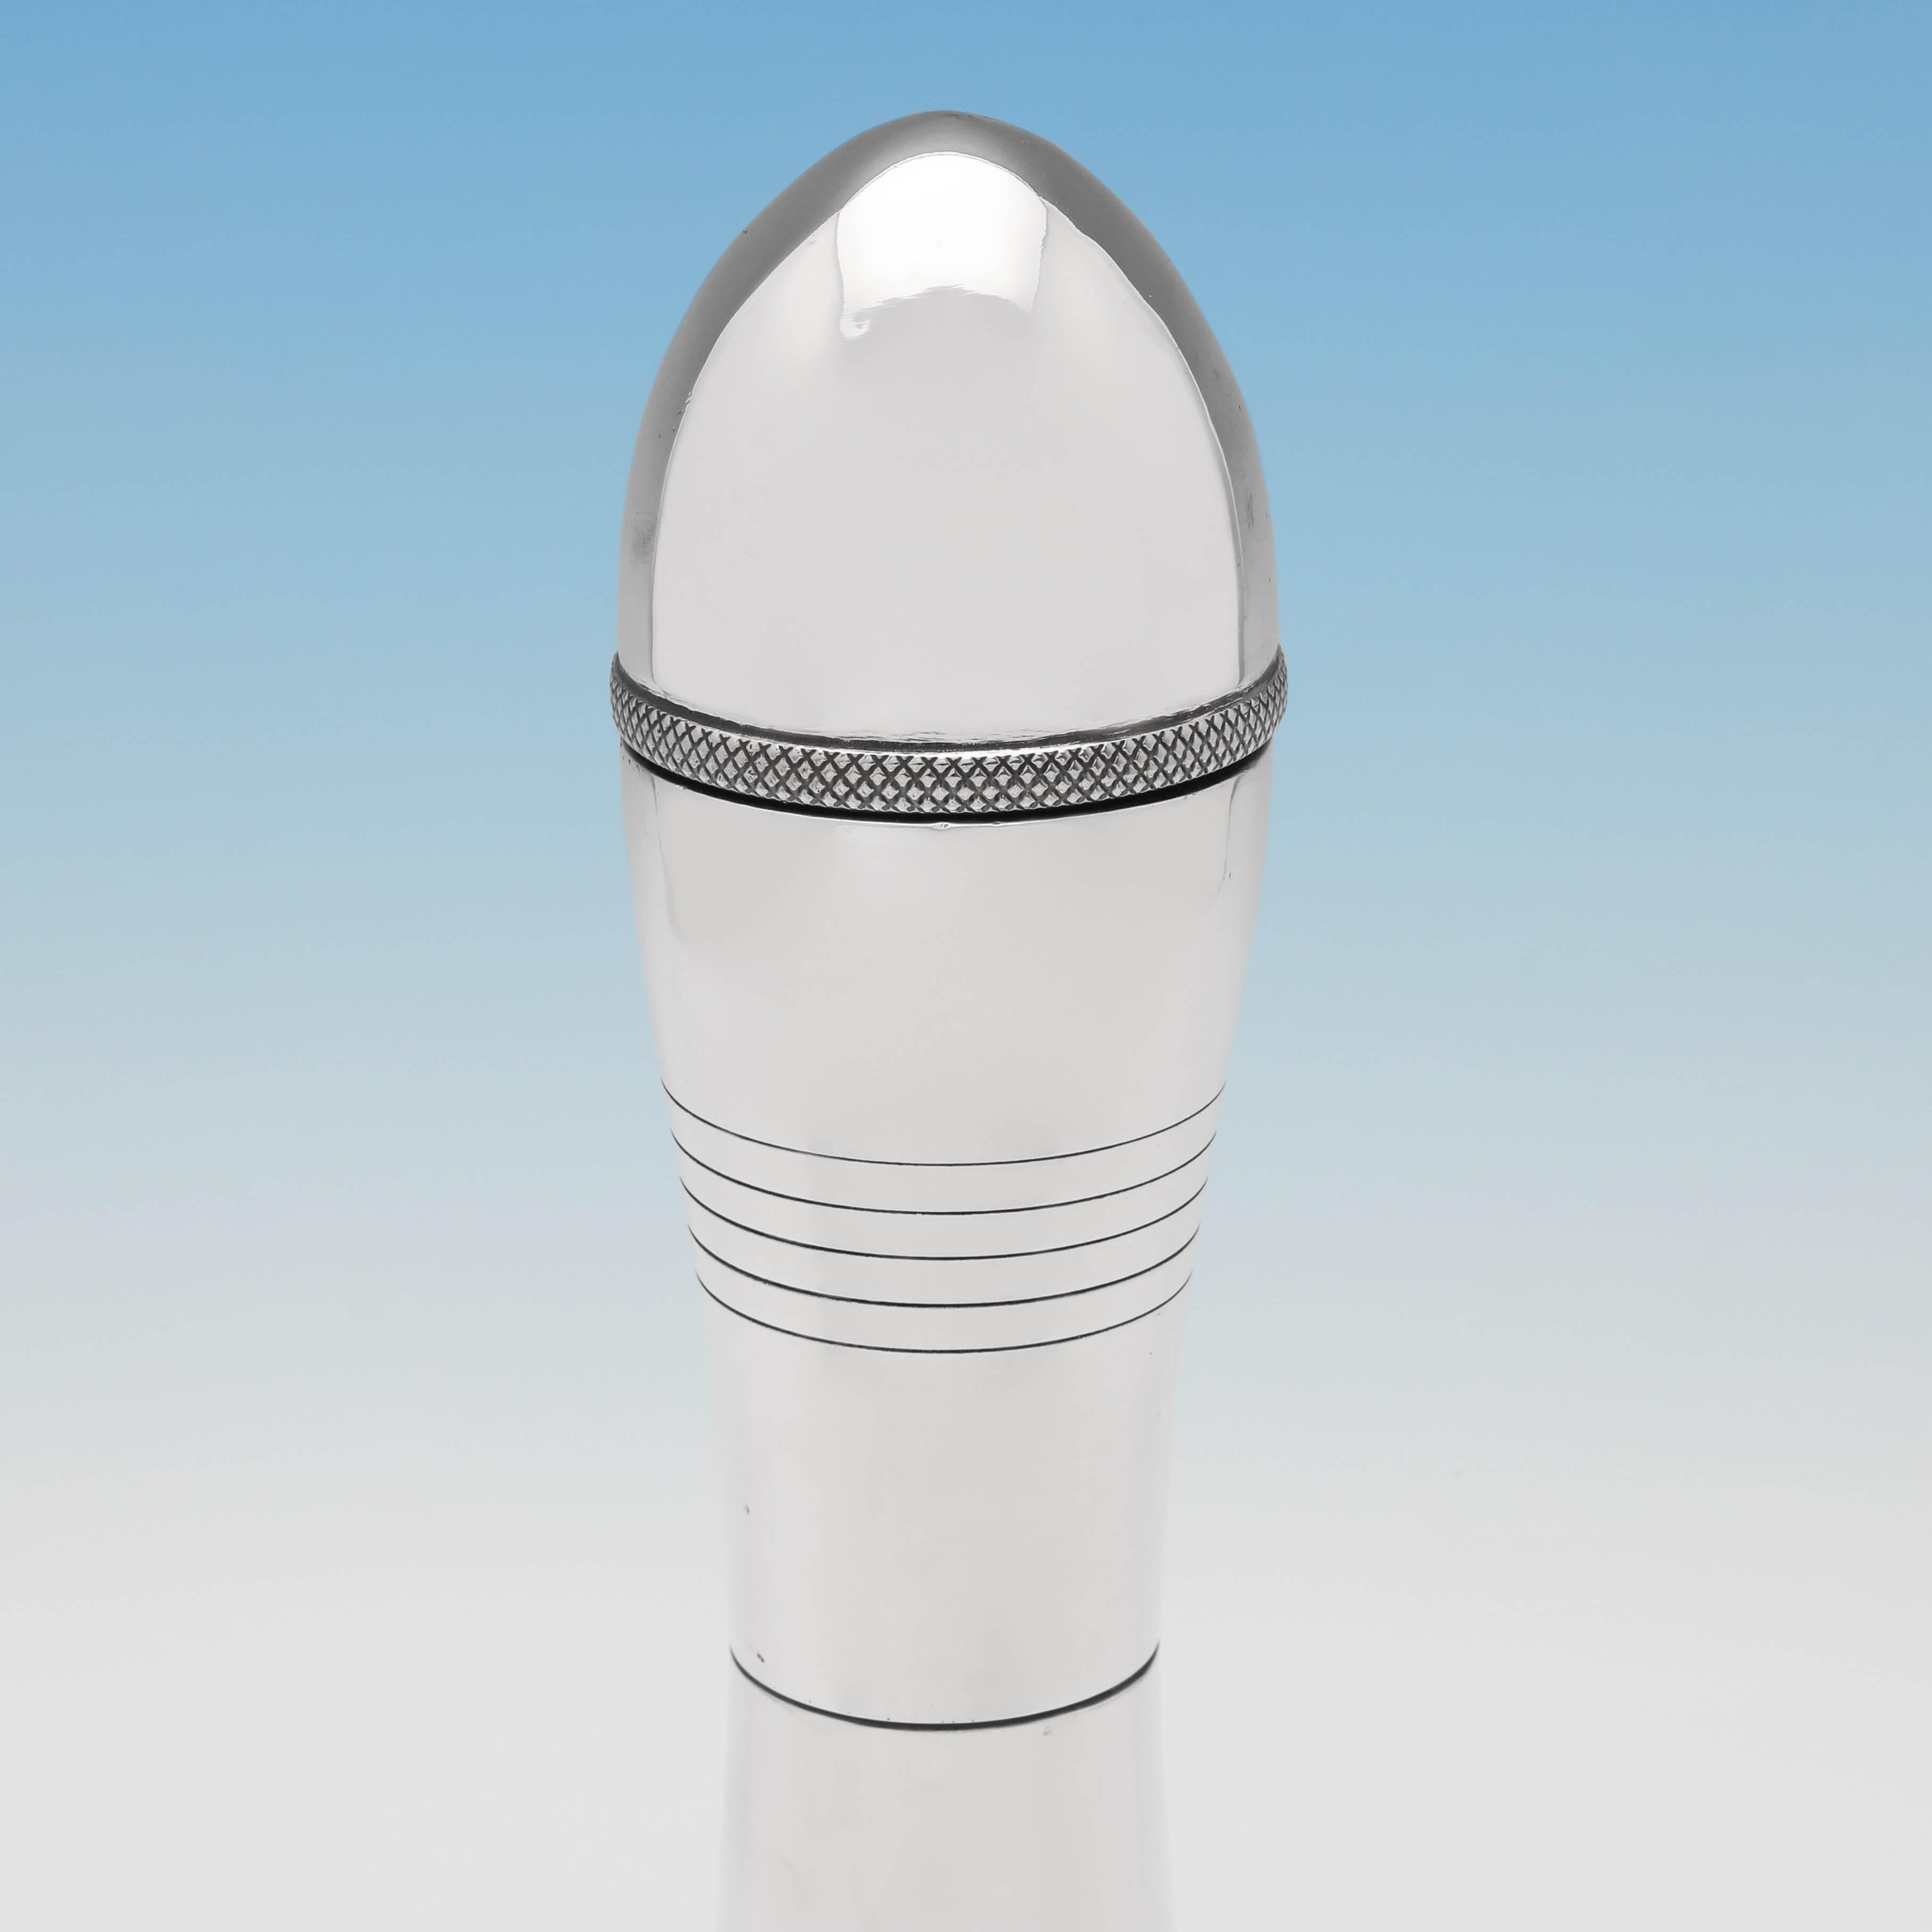 English Dunhill, Novelty 'Joy Bell' Cocktail Shaker, Art Deco Period, c. 1930